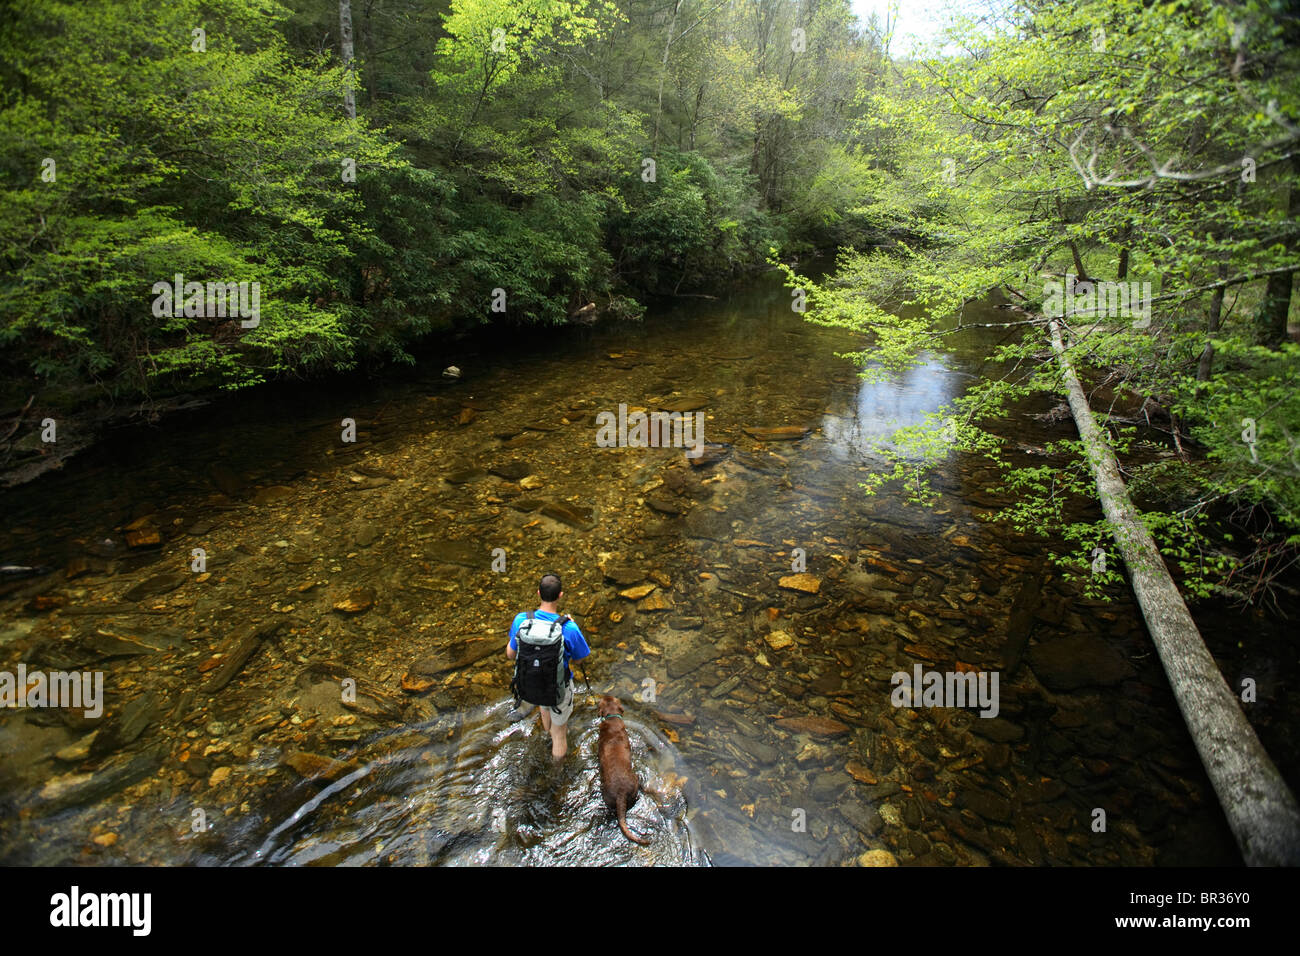 Male backpacker and his dog ford the Davidson River in the Pisgah National Forest near Brevard, NC Stock Photo